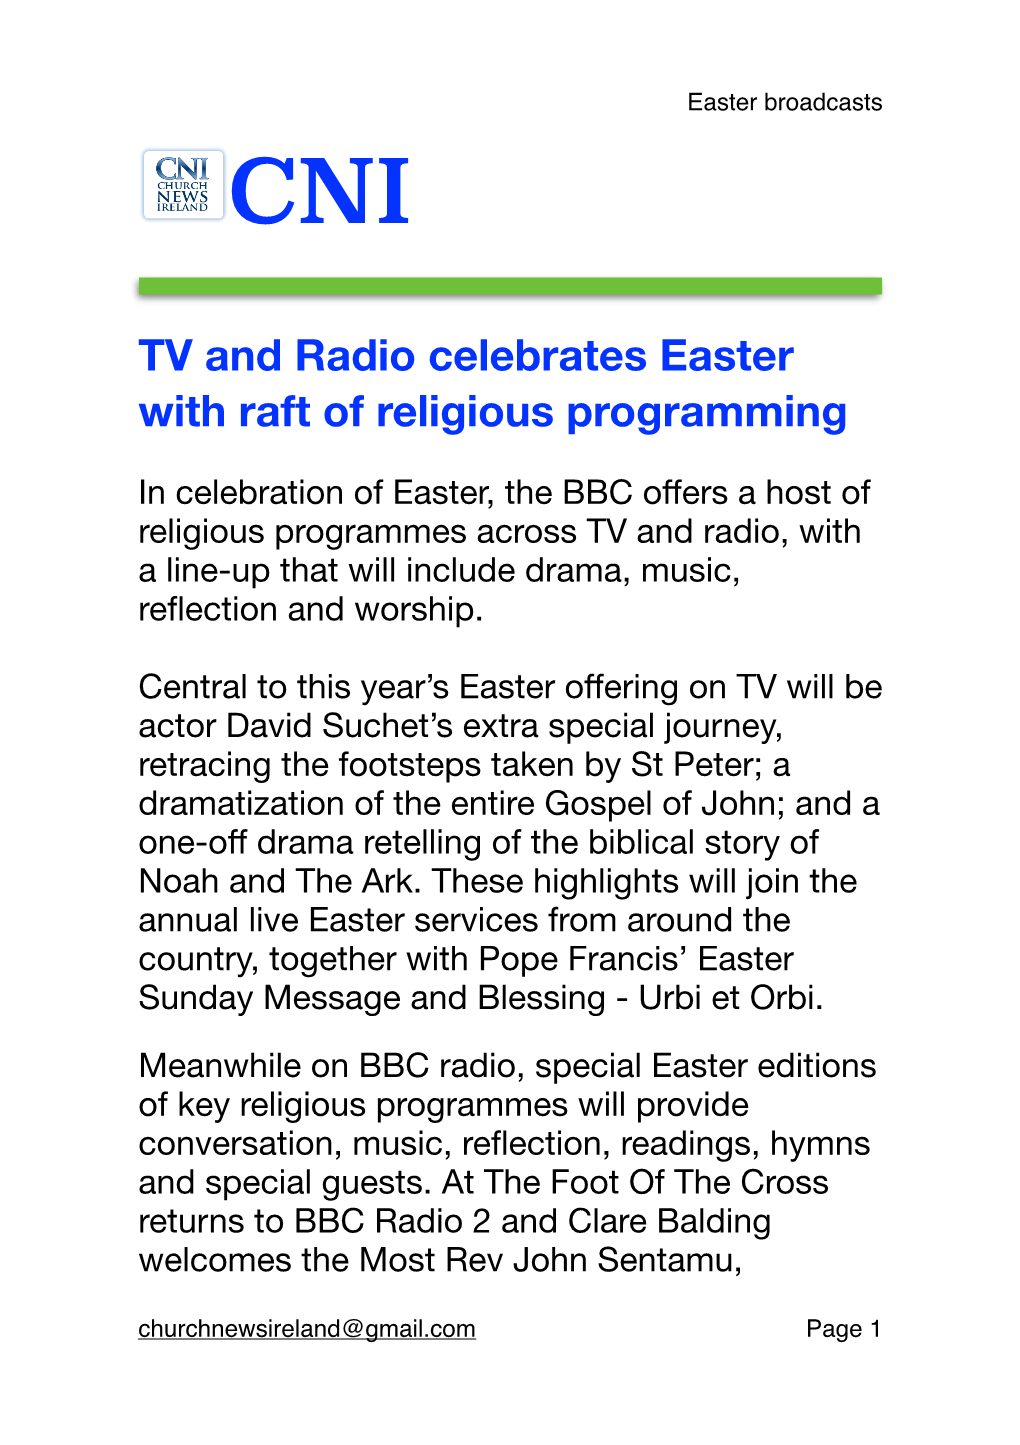 CNI -Easter Broadcasts